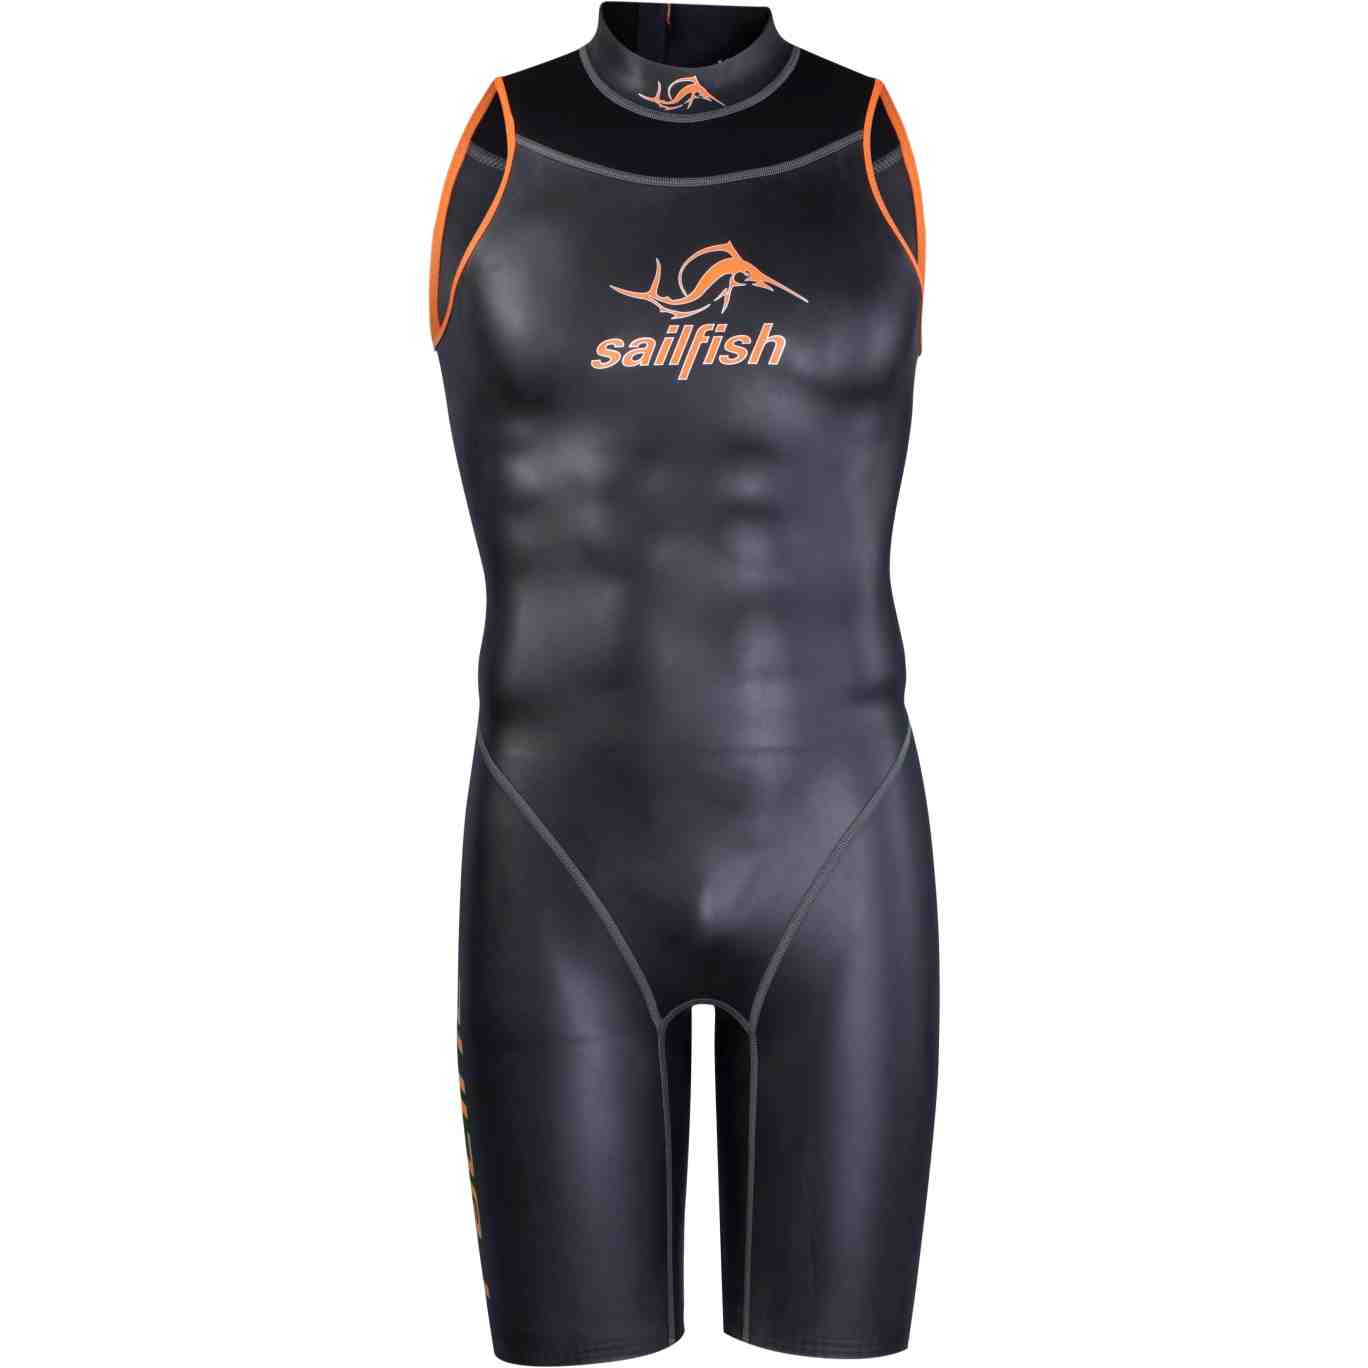 Does a wetsuit get bigger in water?